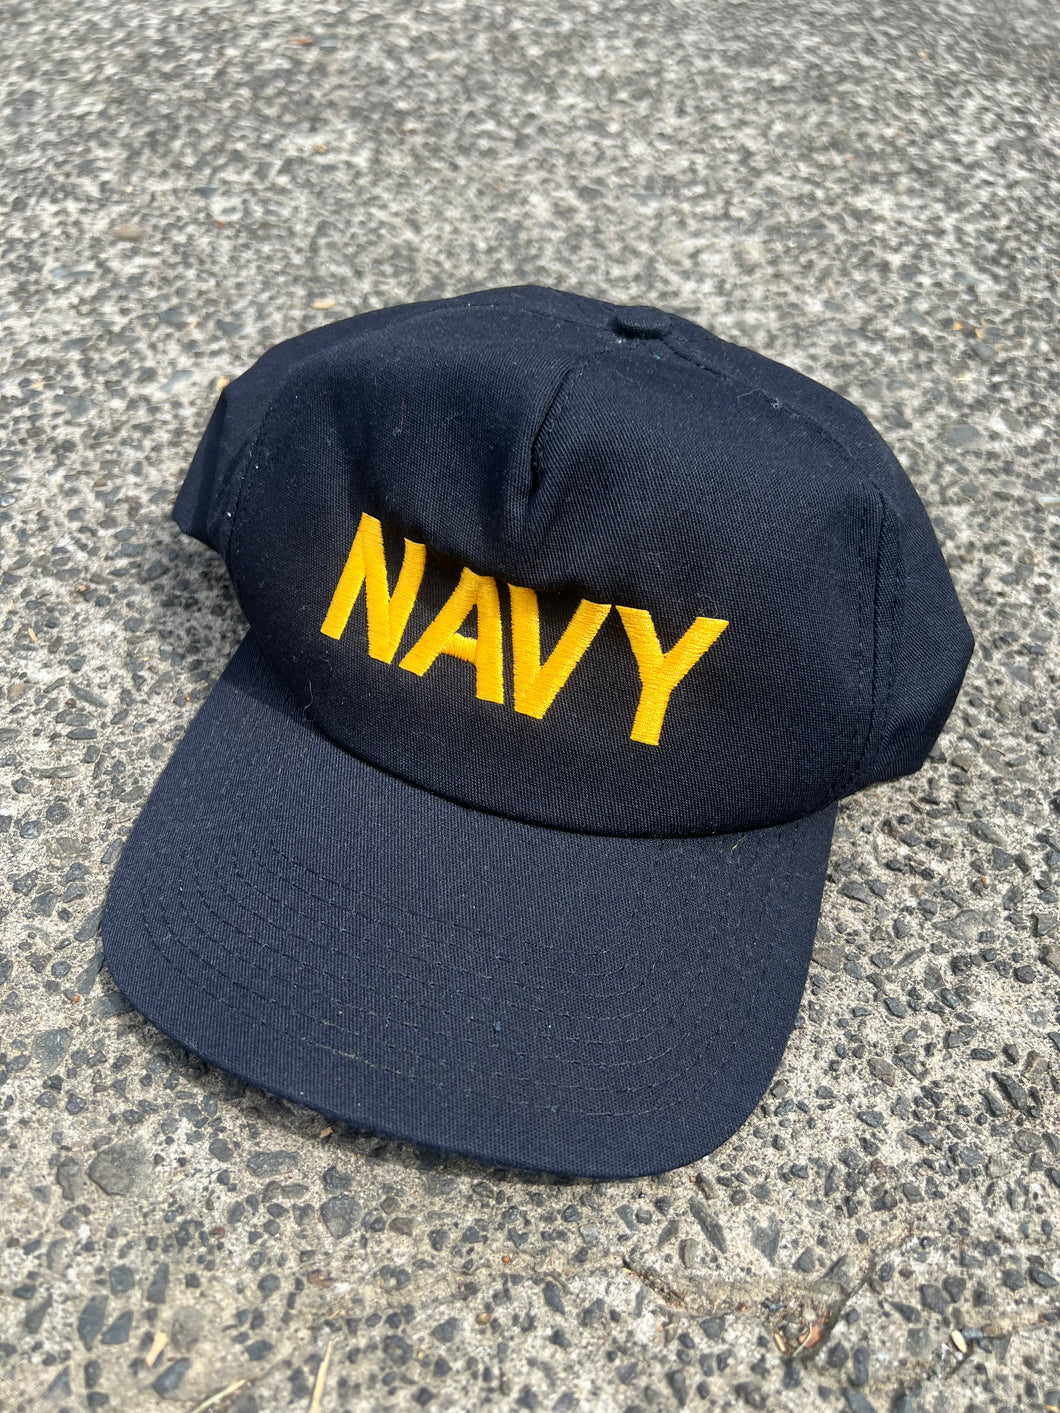 90's USA 90'S NAVY HAT - ONE SIZE FITS ALL OSFA